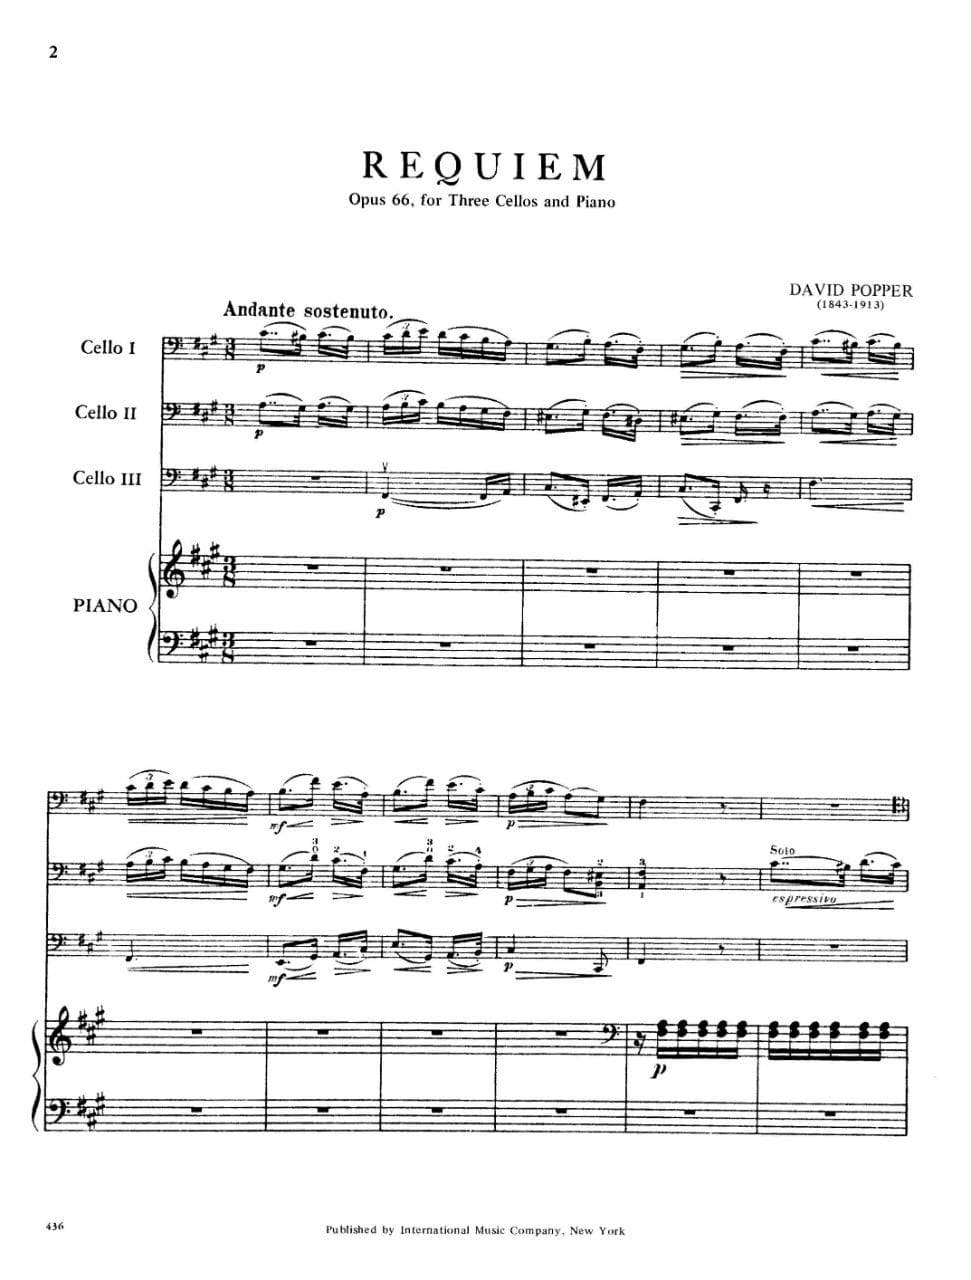 Popper, David - Requiem Op 66 For Three Cellos and Piano Published by International Music Company